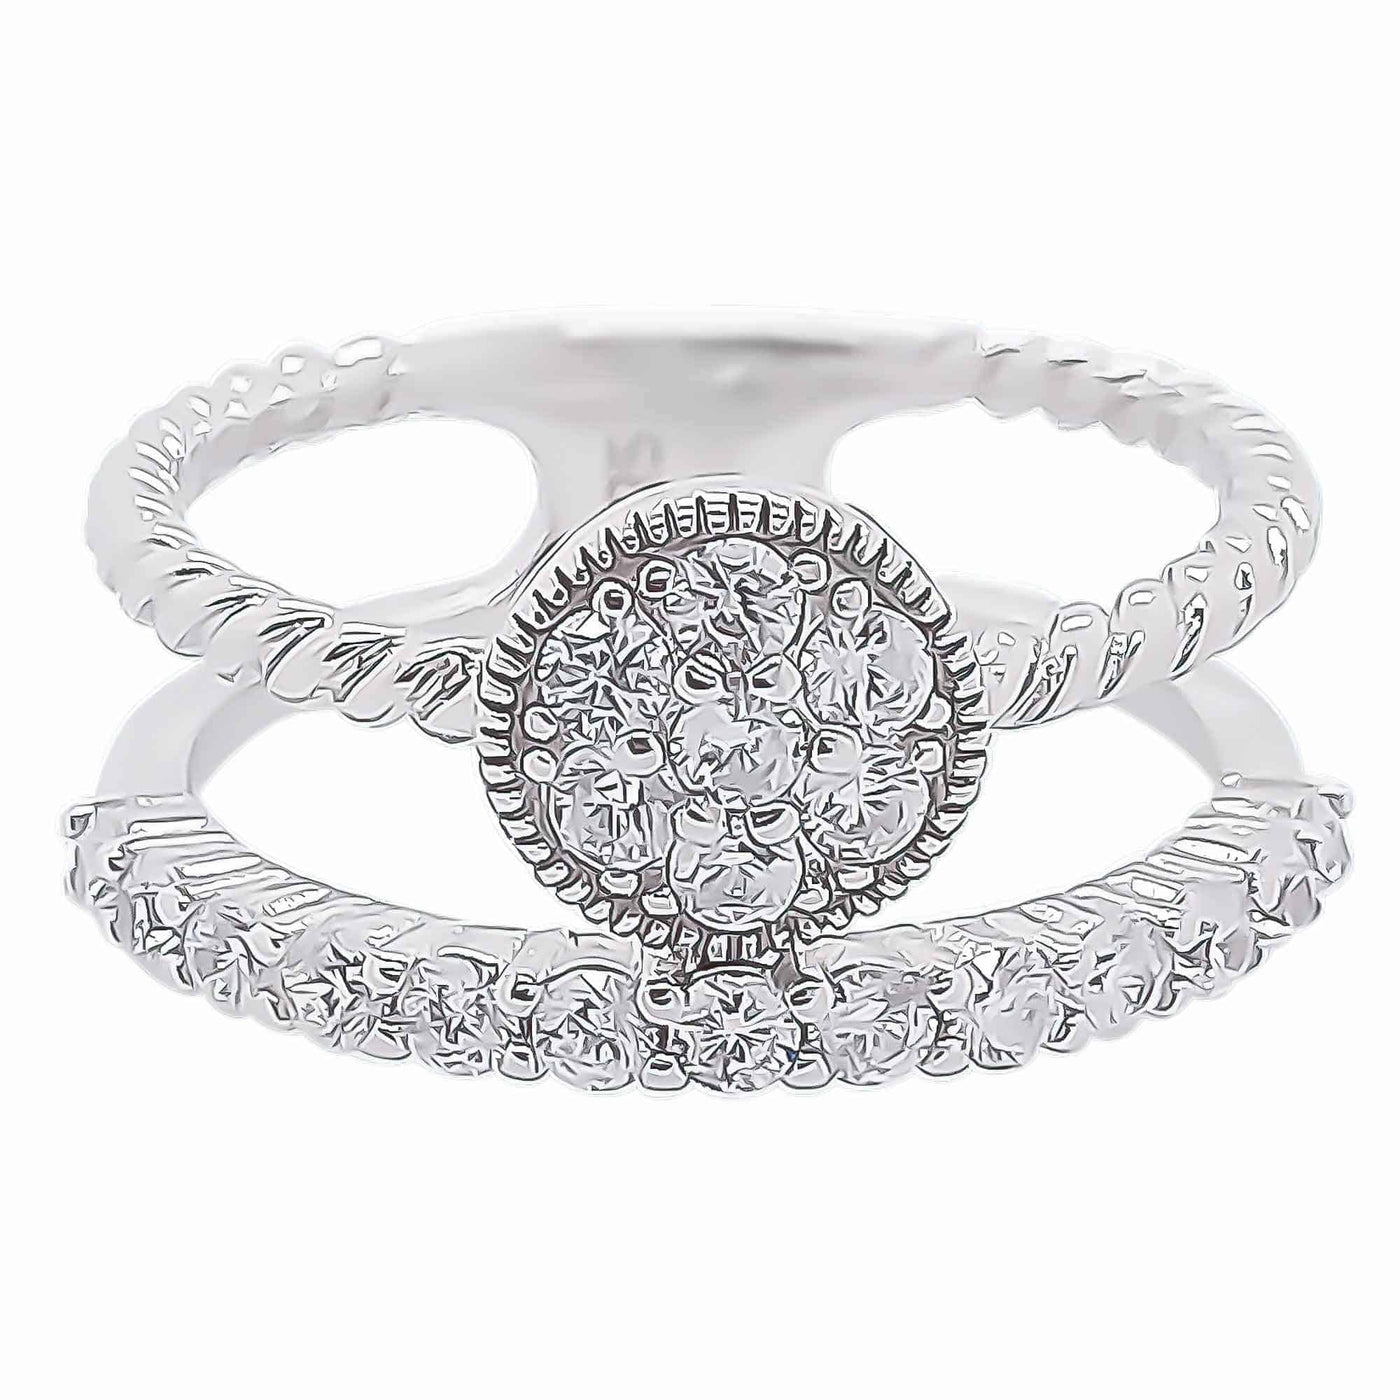 Rhodium Plated Sterling Silver CZ Engagement Ring Set. The product sku is R322.